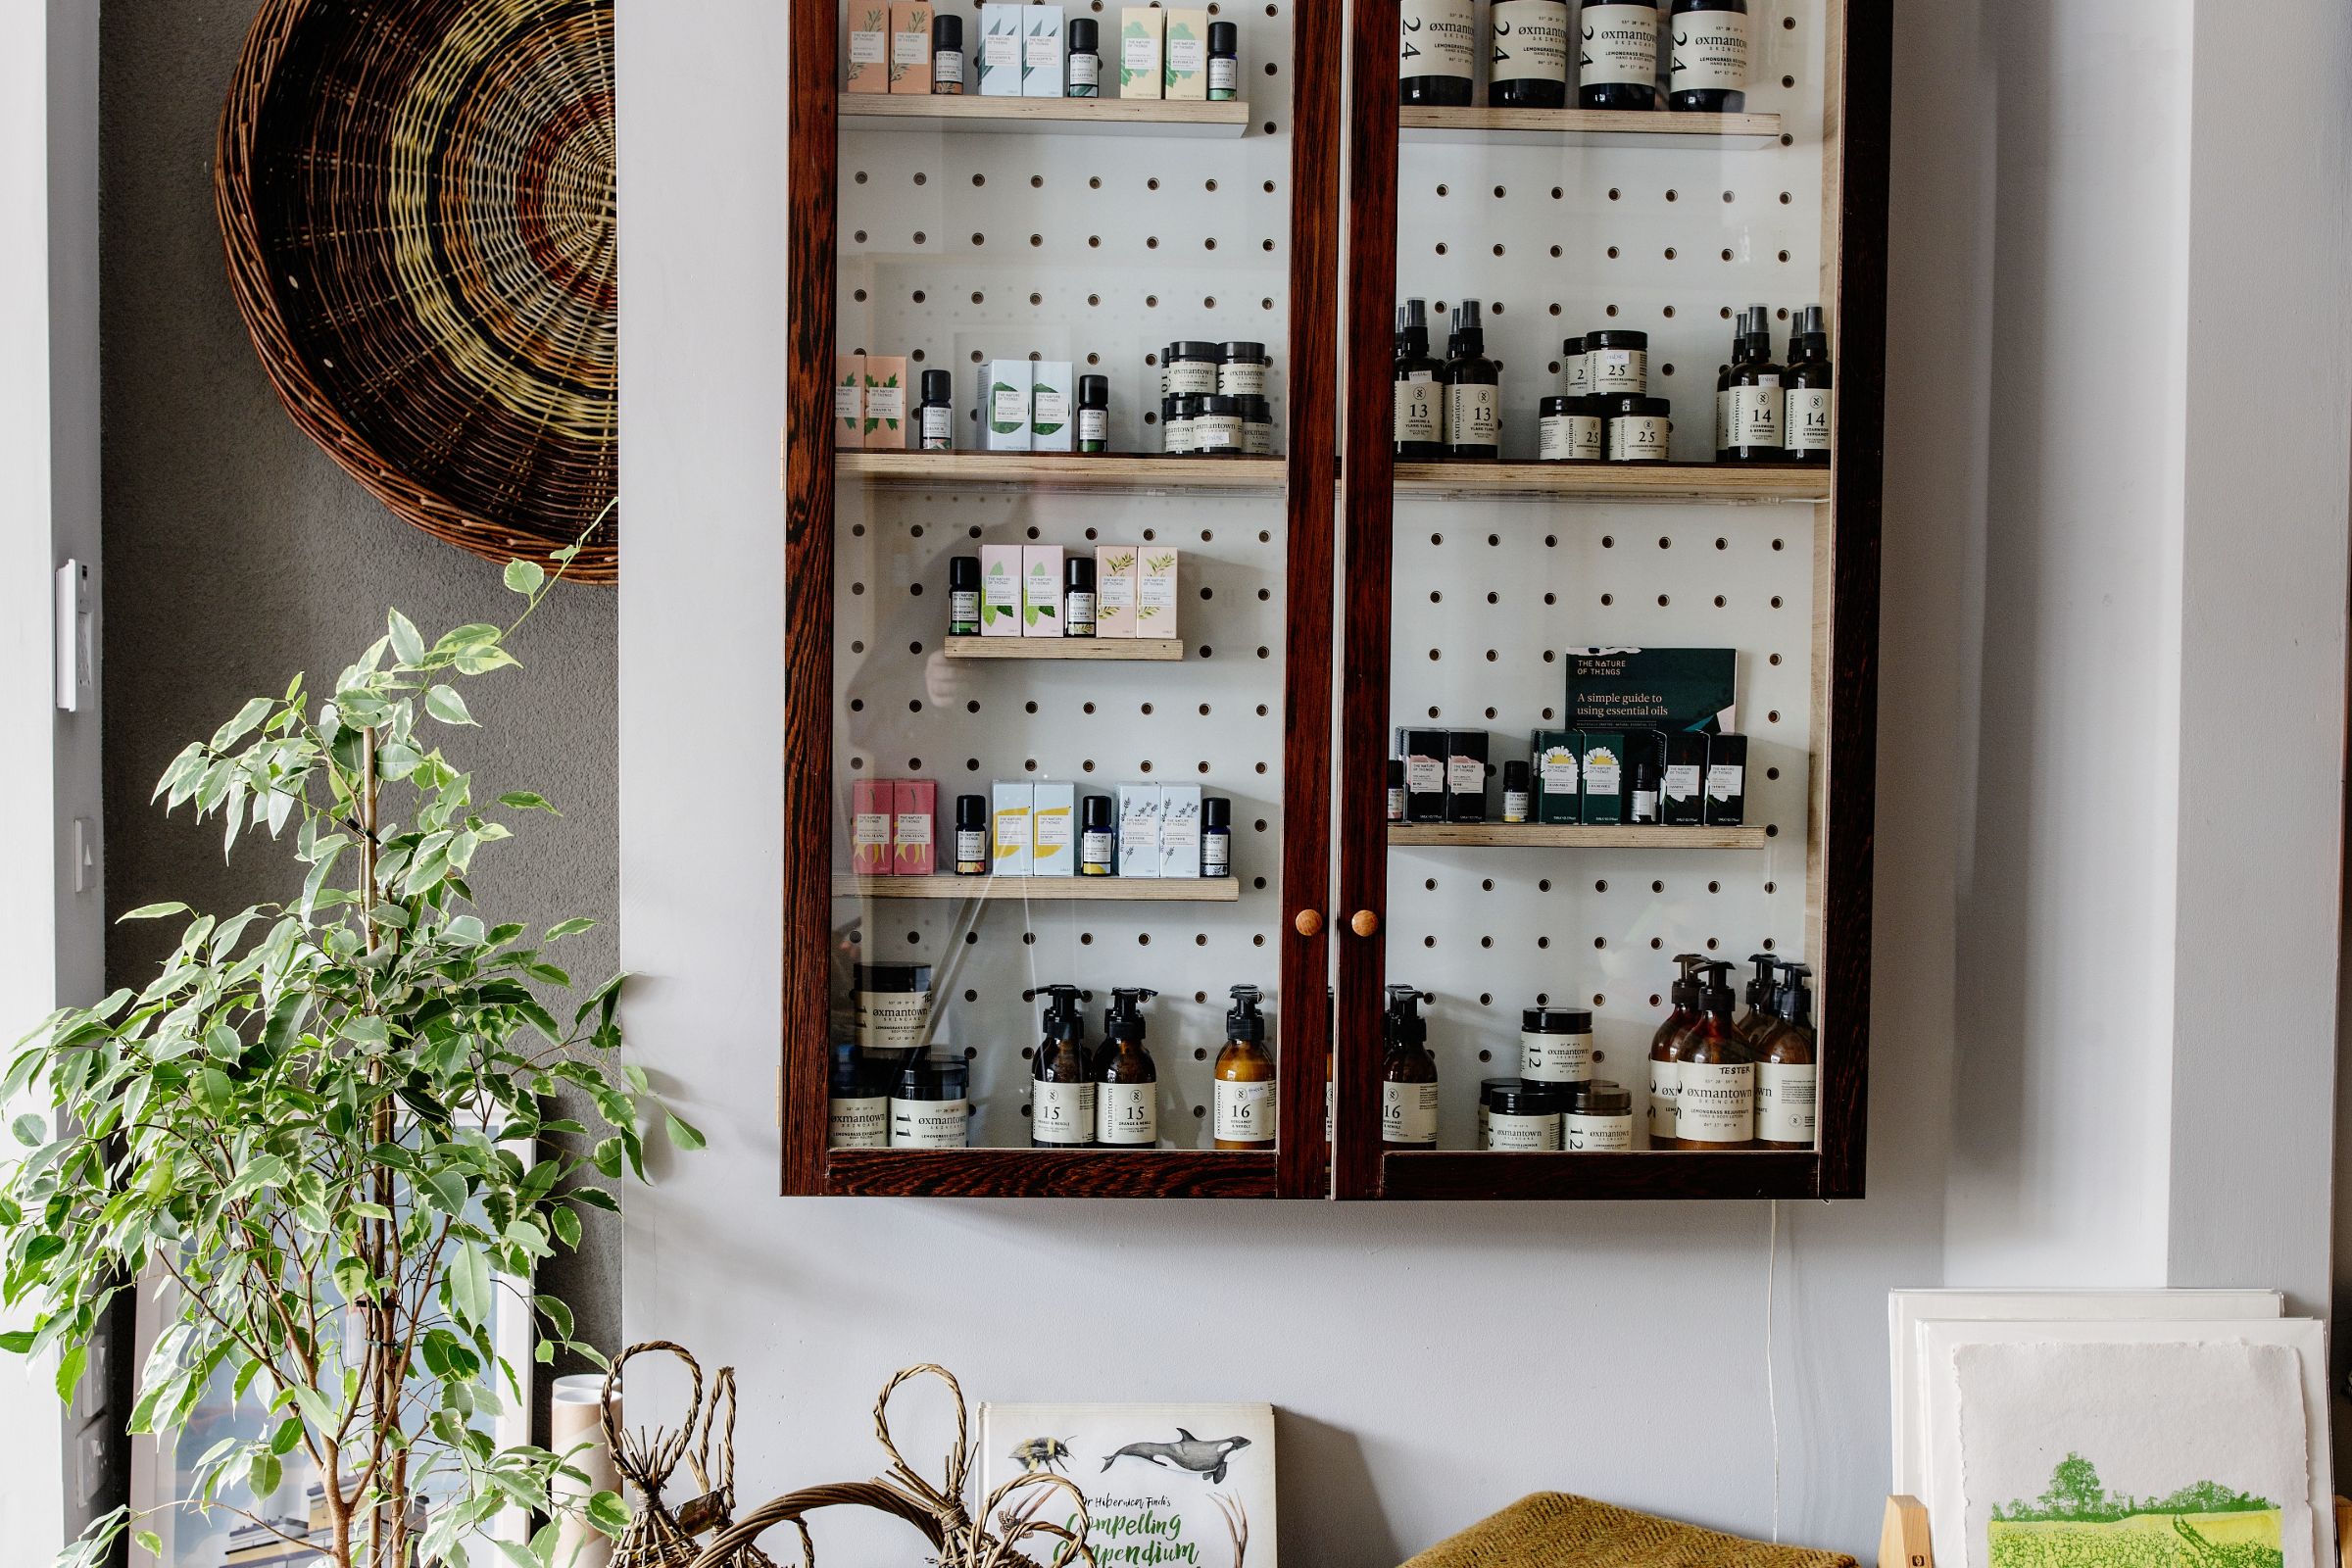 Image of products in Irish Design Shop in County Dublin